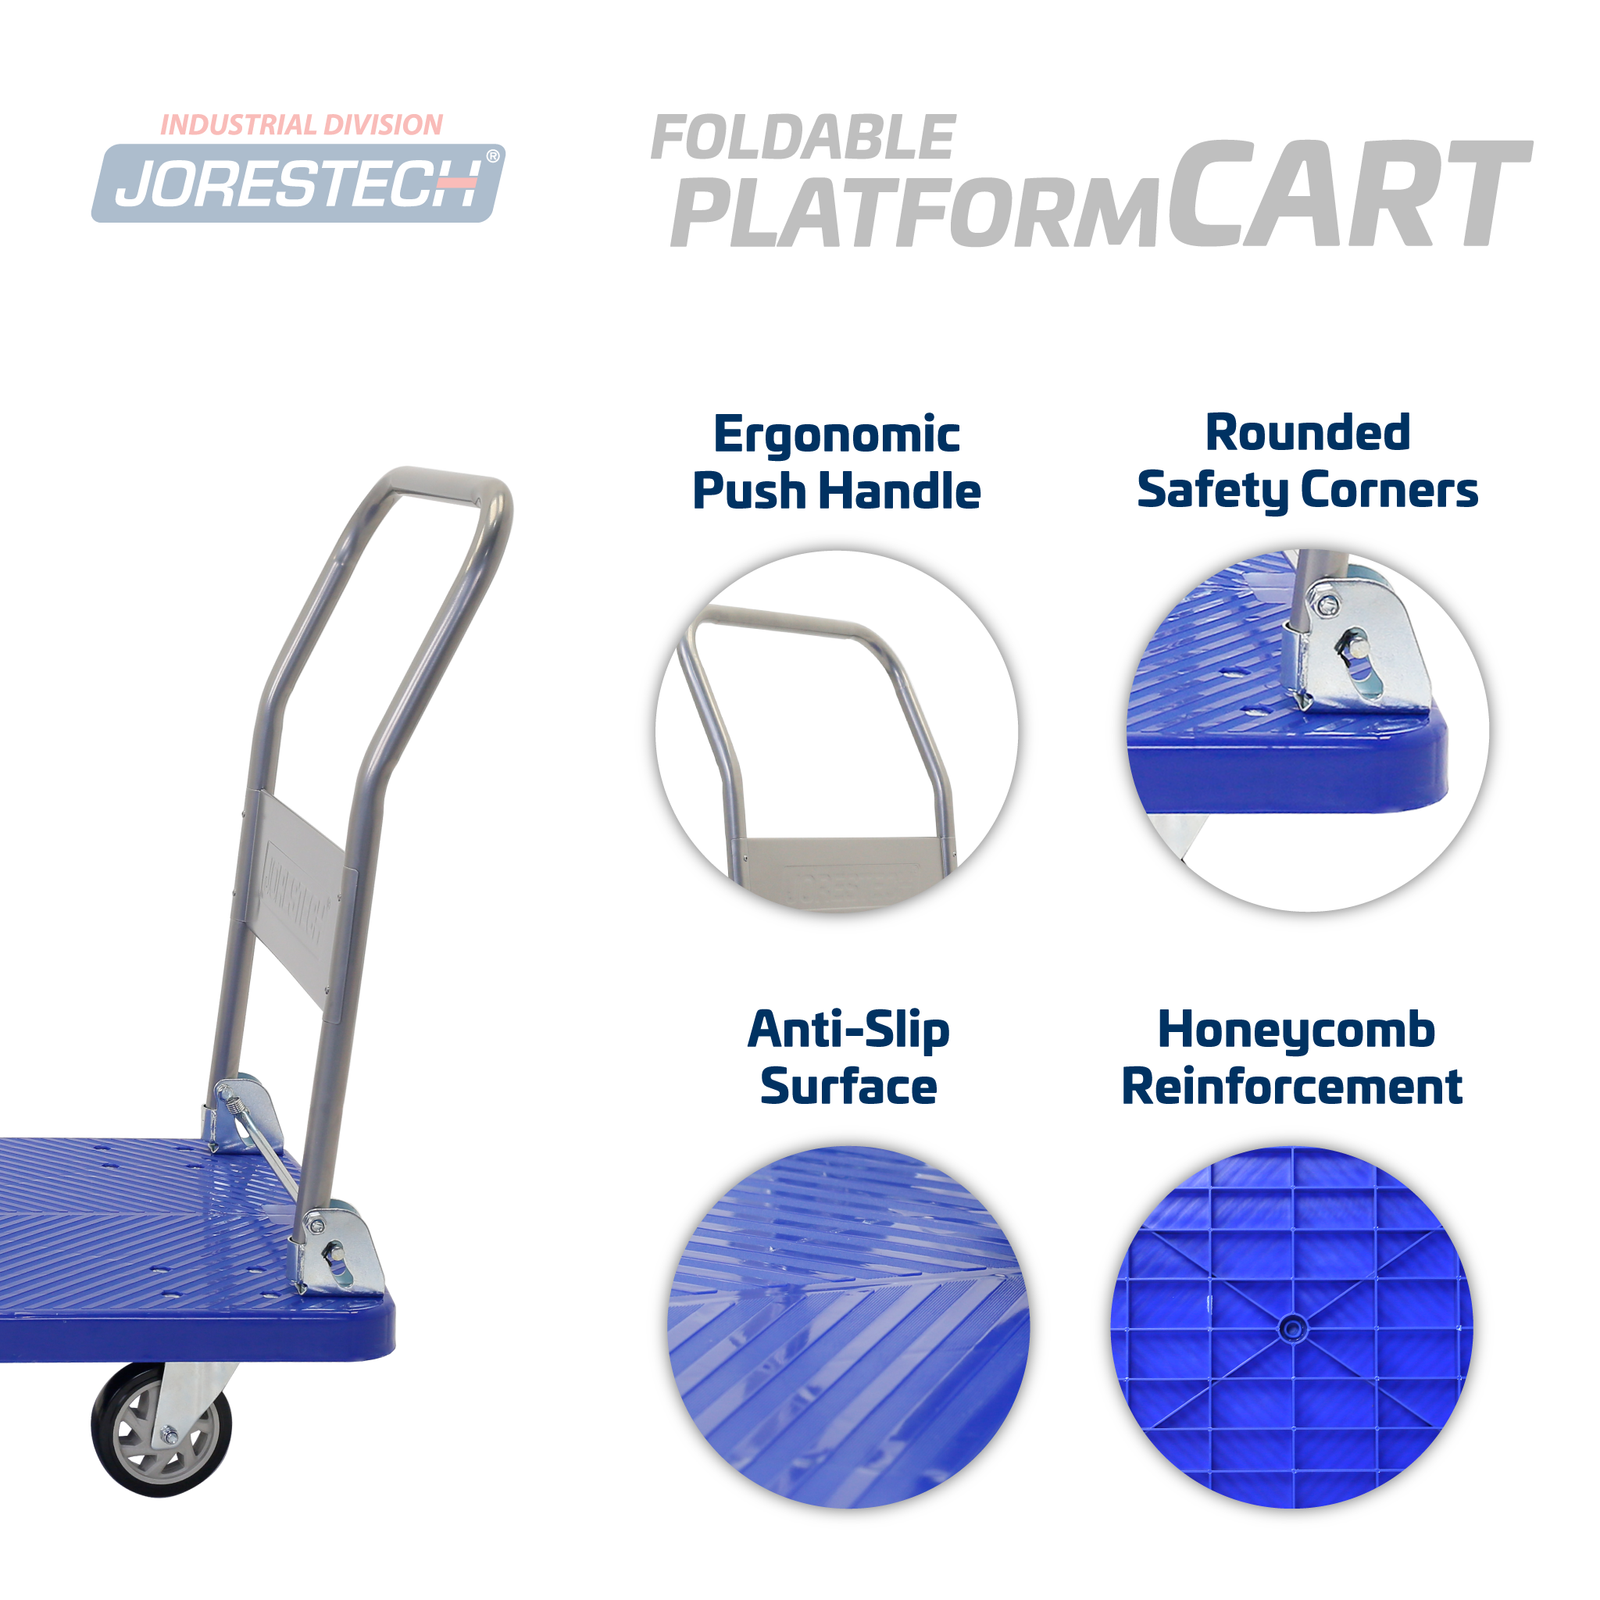 Features of the jorestech foldable platform dolly cart. The features read: ergonomic push handle, rounded safety corners, anti-slip surface, honeycomb reinforcement